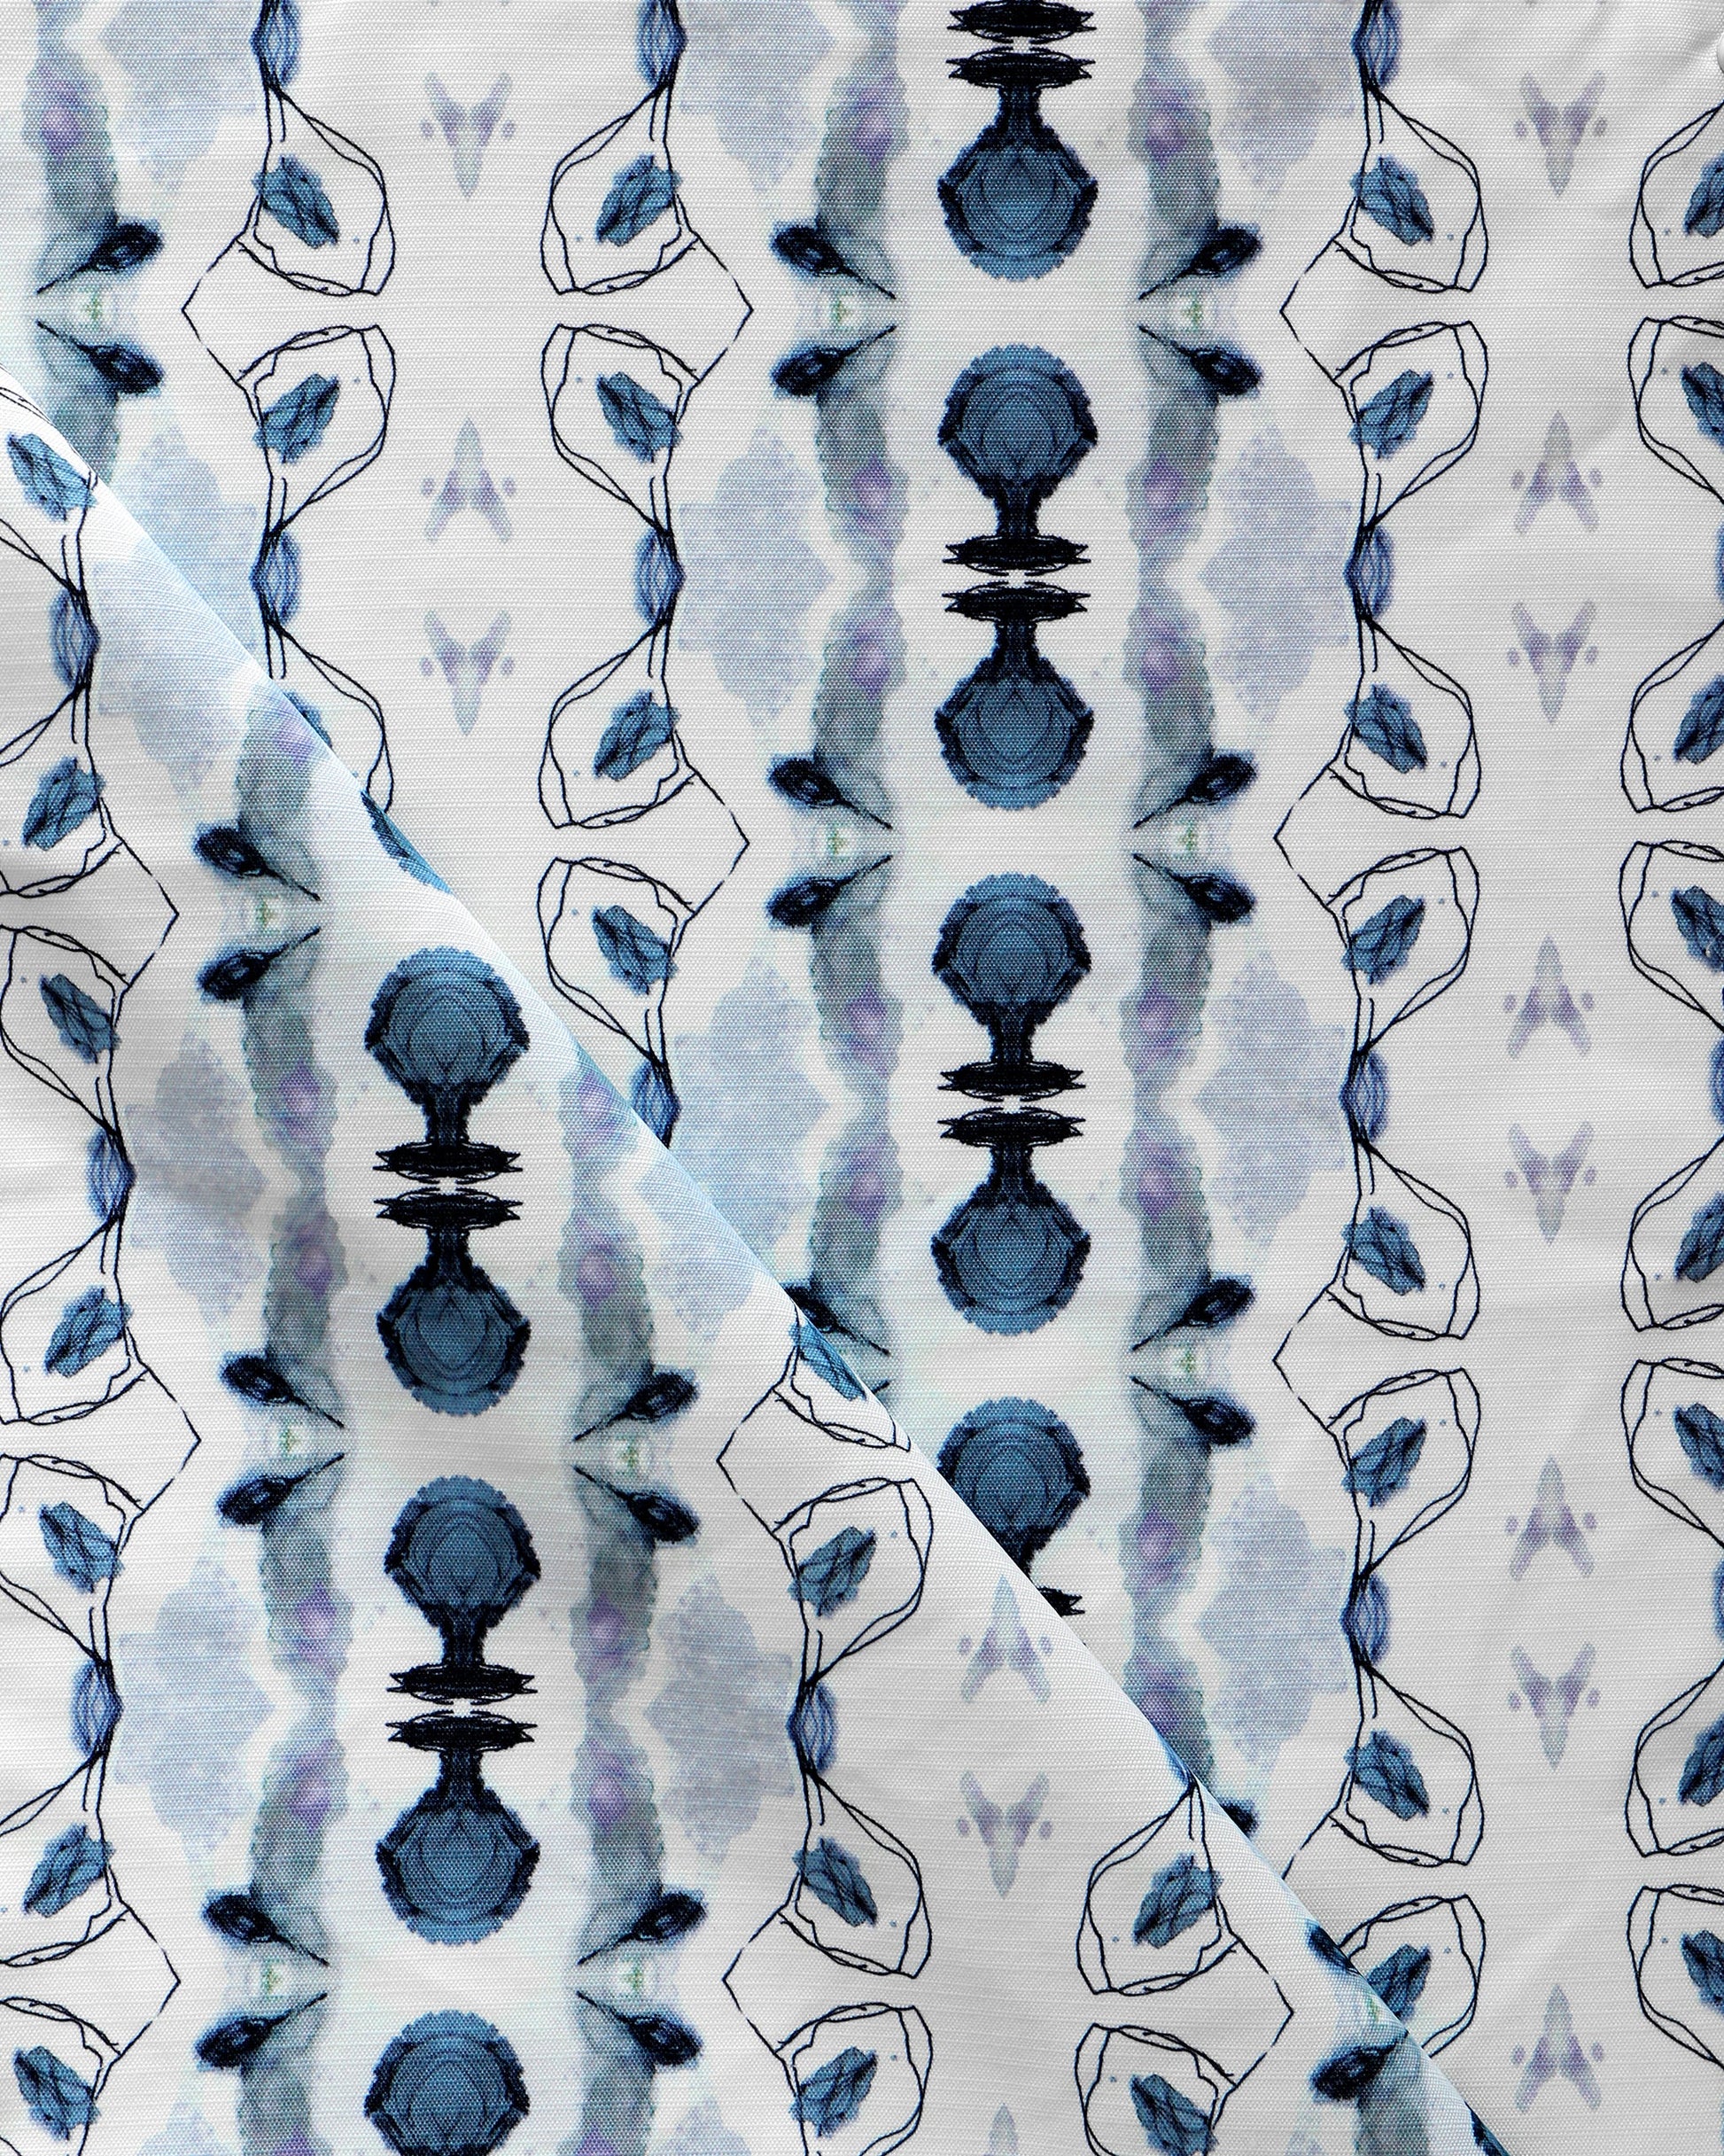 A blue and white fabric with an abstract pattern, made of Bali Stripe Performance Fabric Indigo